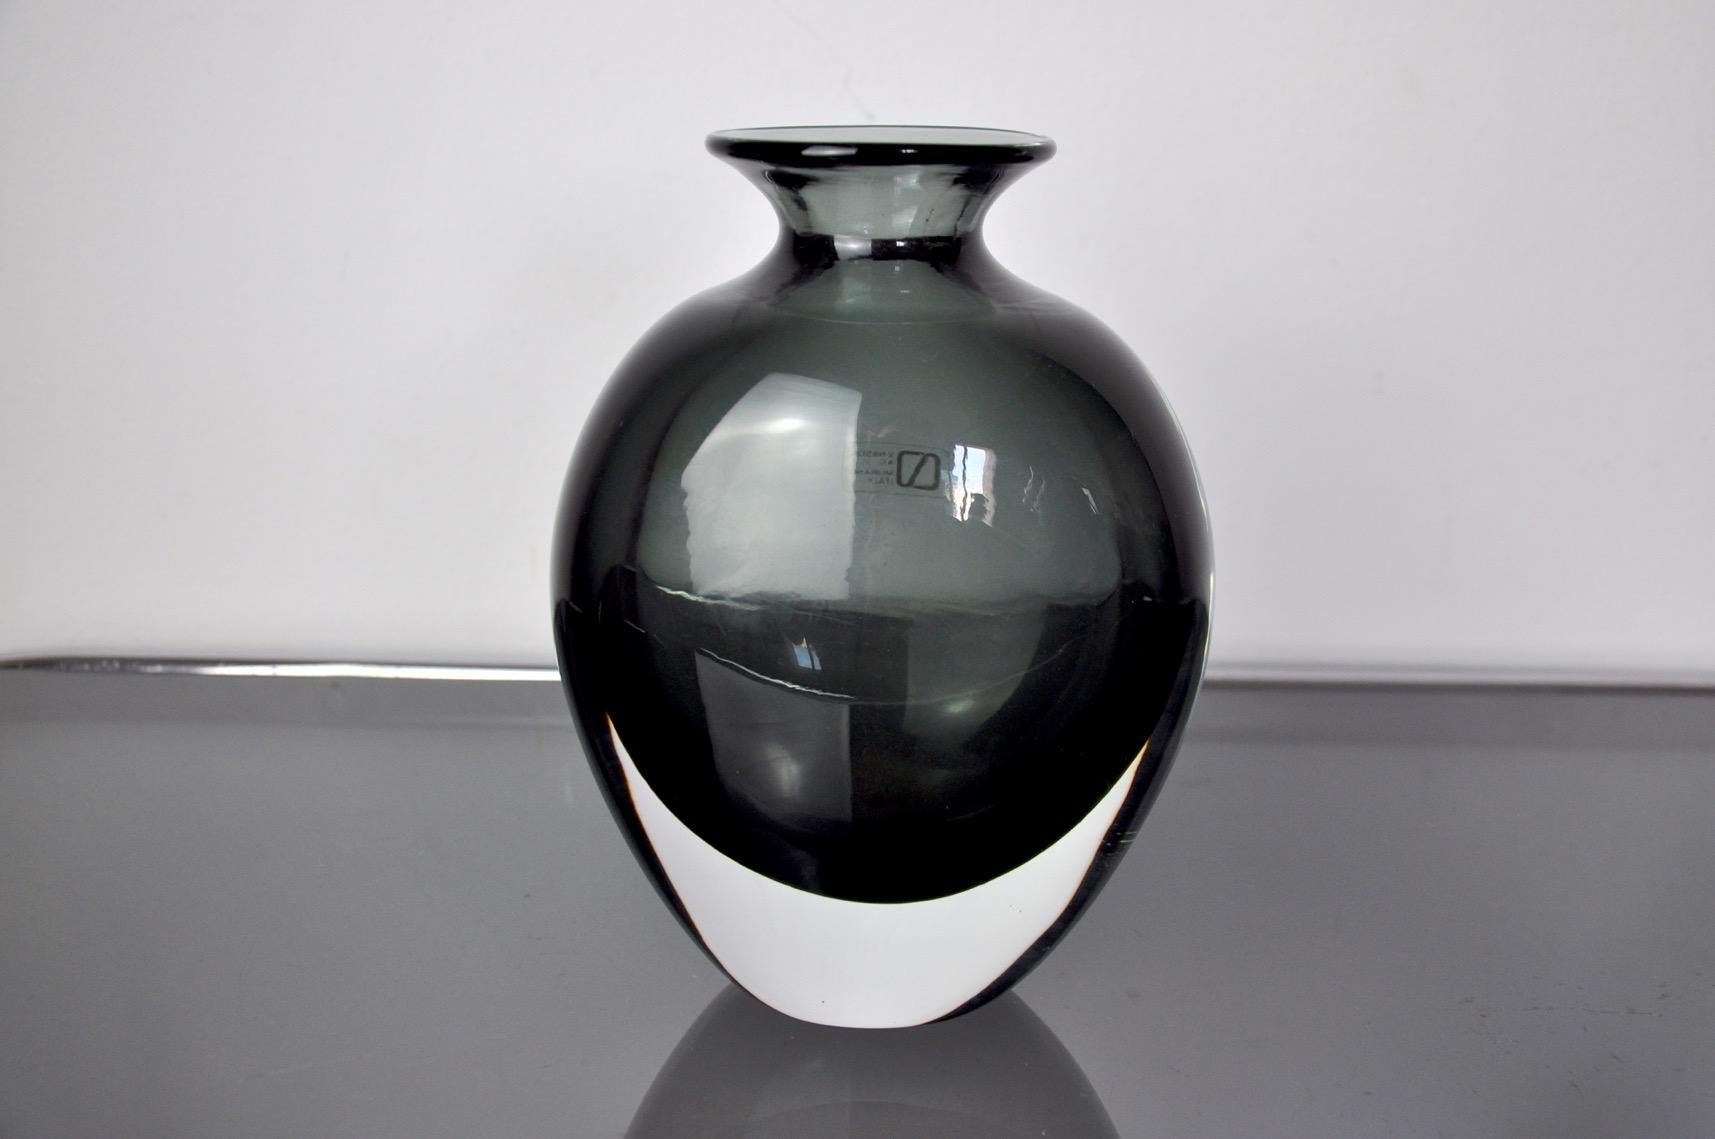 Very beautiful and rare vase in black and transparent italian art glass nason blown by hand.

This vase still has its label of the famous brand v&c nason and was made by carlo and vincenzo nason in murano, italy, in the 1960s.

This vase is a